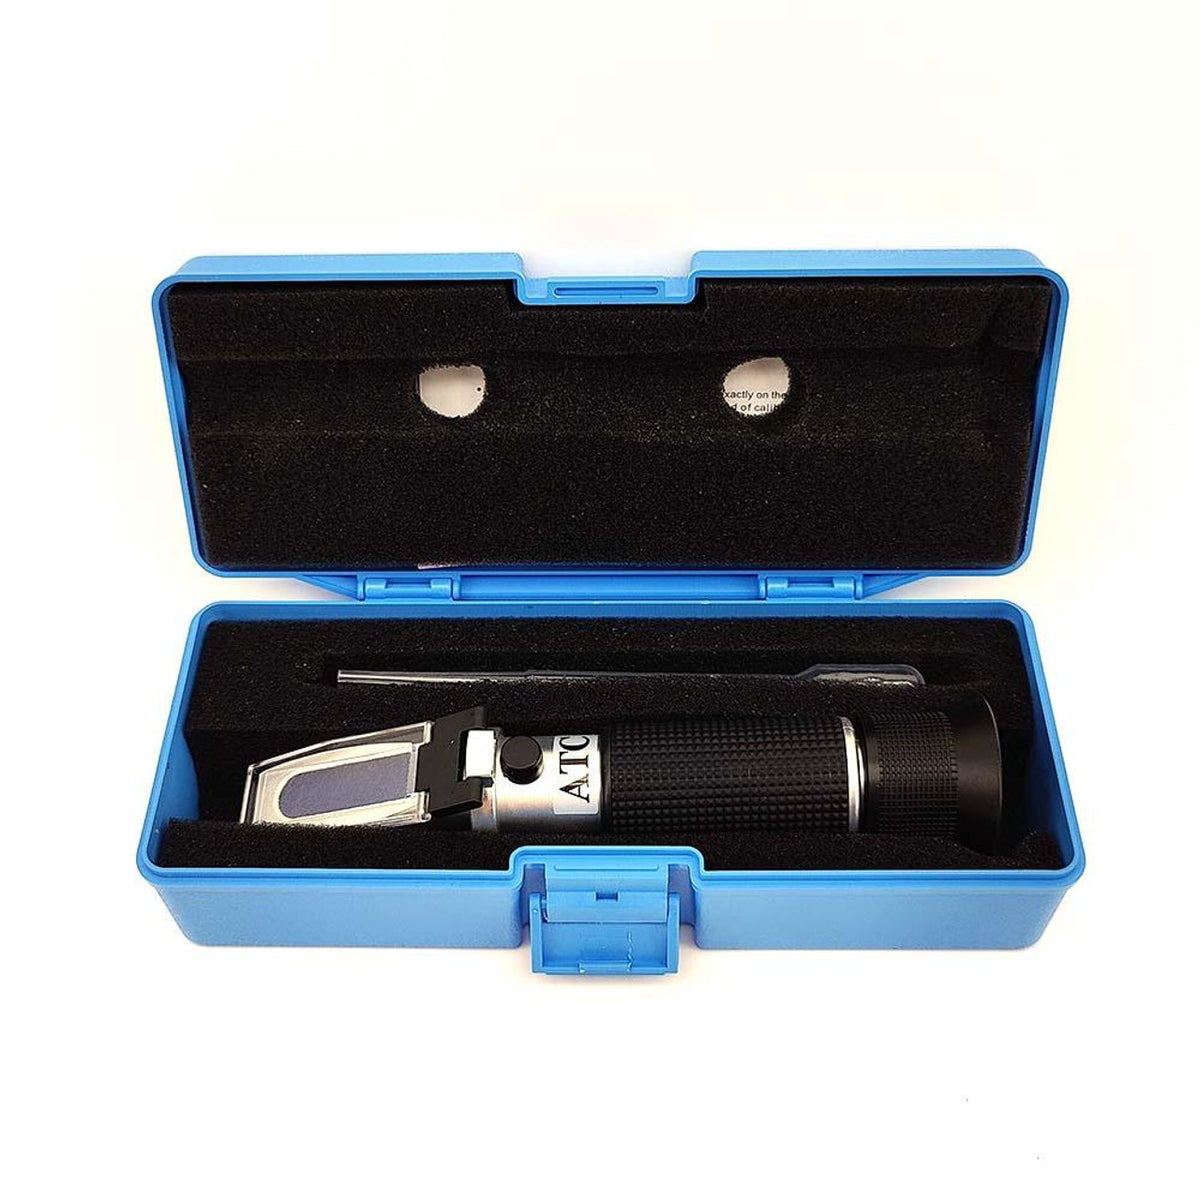 Portable Refractometer ATC (Three Scale) Brix - SG Sugar - SG Wort - All Things Fermented | Home Brew Shop NZ | Supplies | Equipment